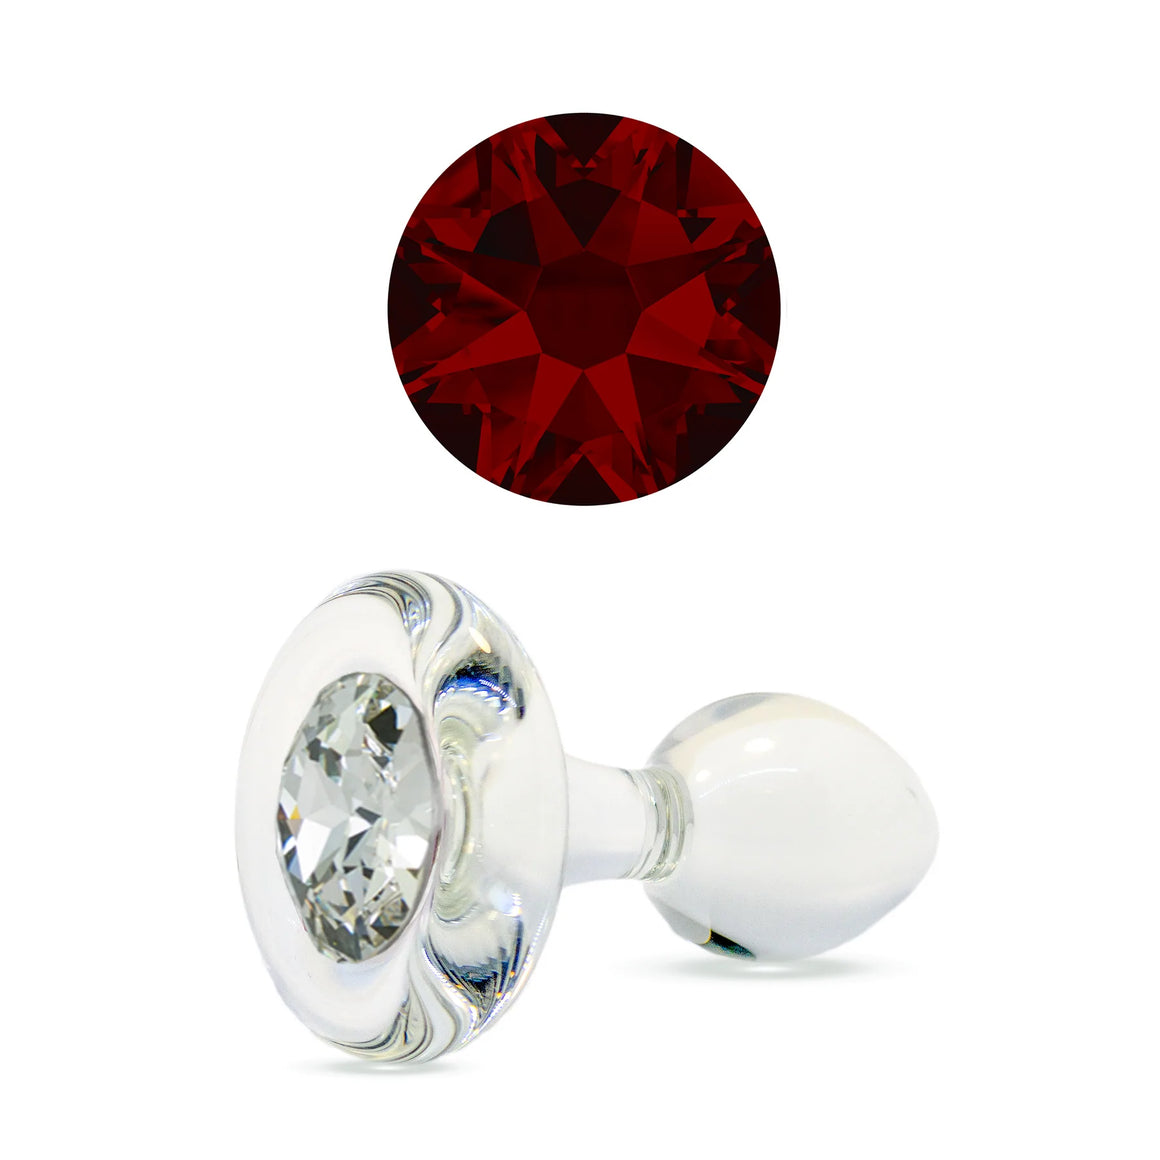 Red Magma Crystal Delight Plug (various sizes)